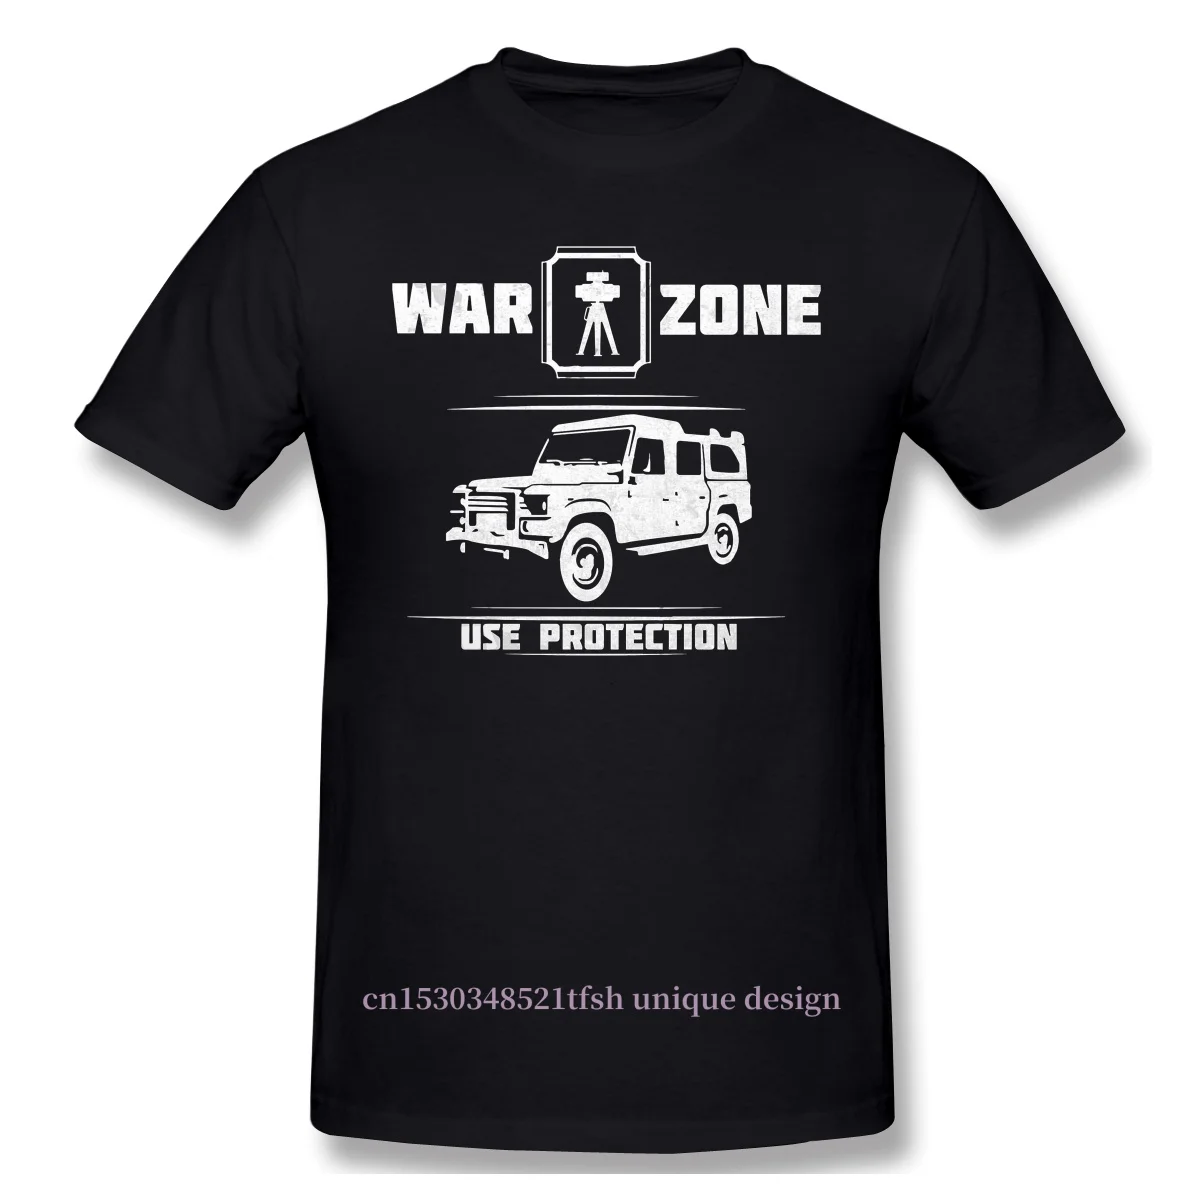 

Warzone Use Protection Classic T-Shirt Men 100% Cotton Short Summer Sleeve COD Black Ops Cold War Adventure Games Casual Loose